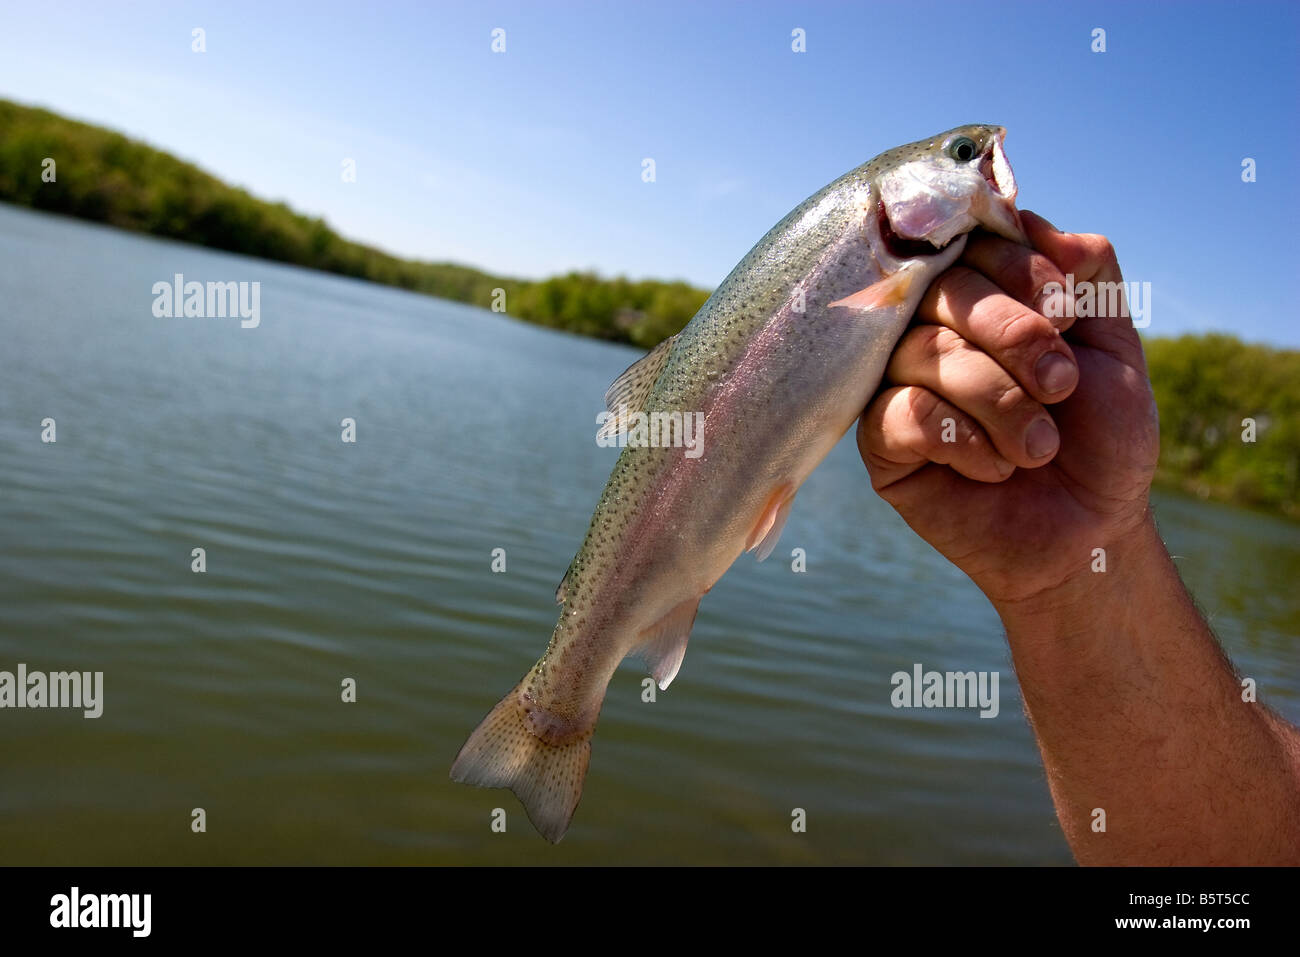 A man holds a rainbow trout caught at Lake Brittany in Bella Vista